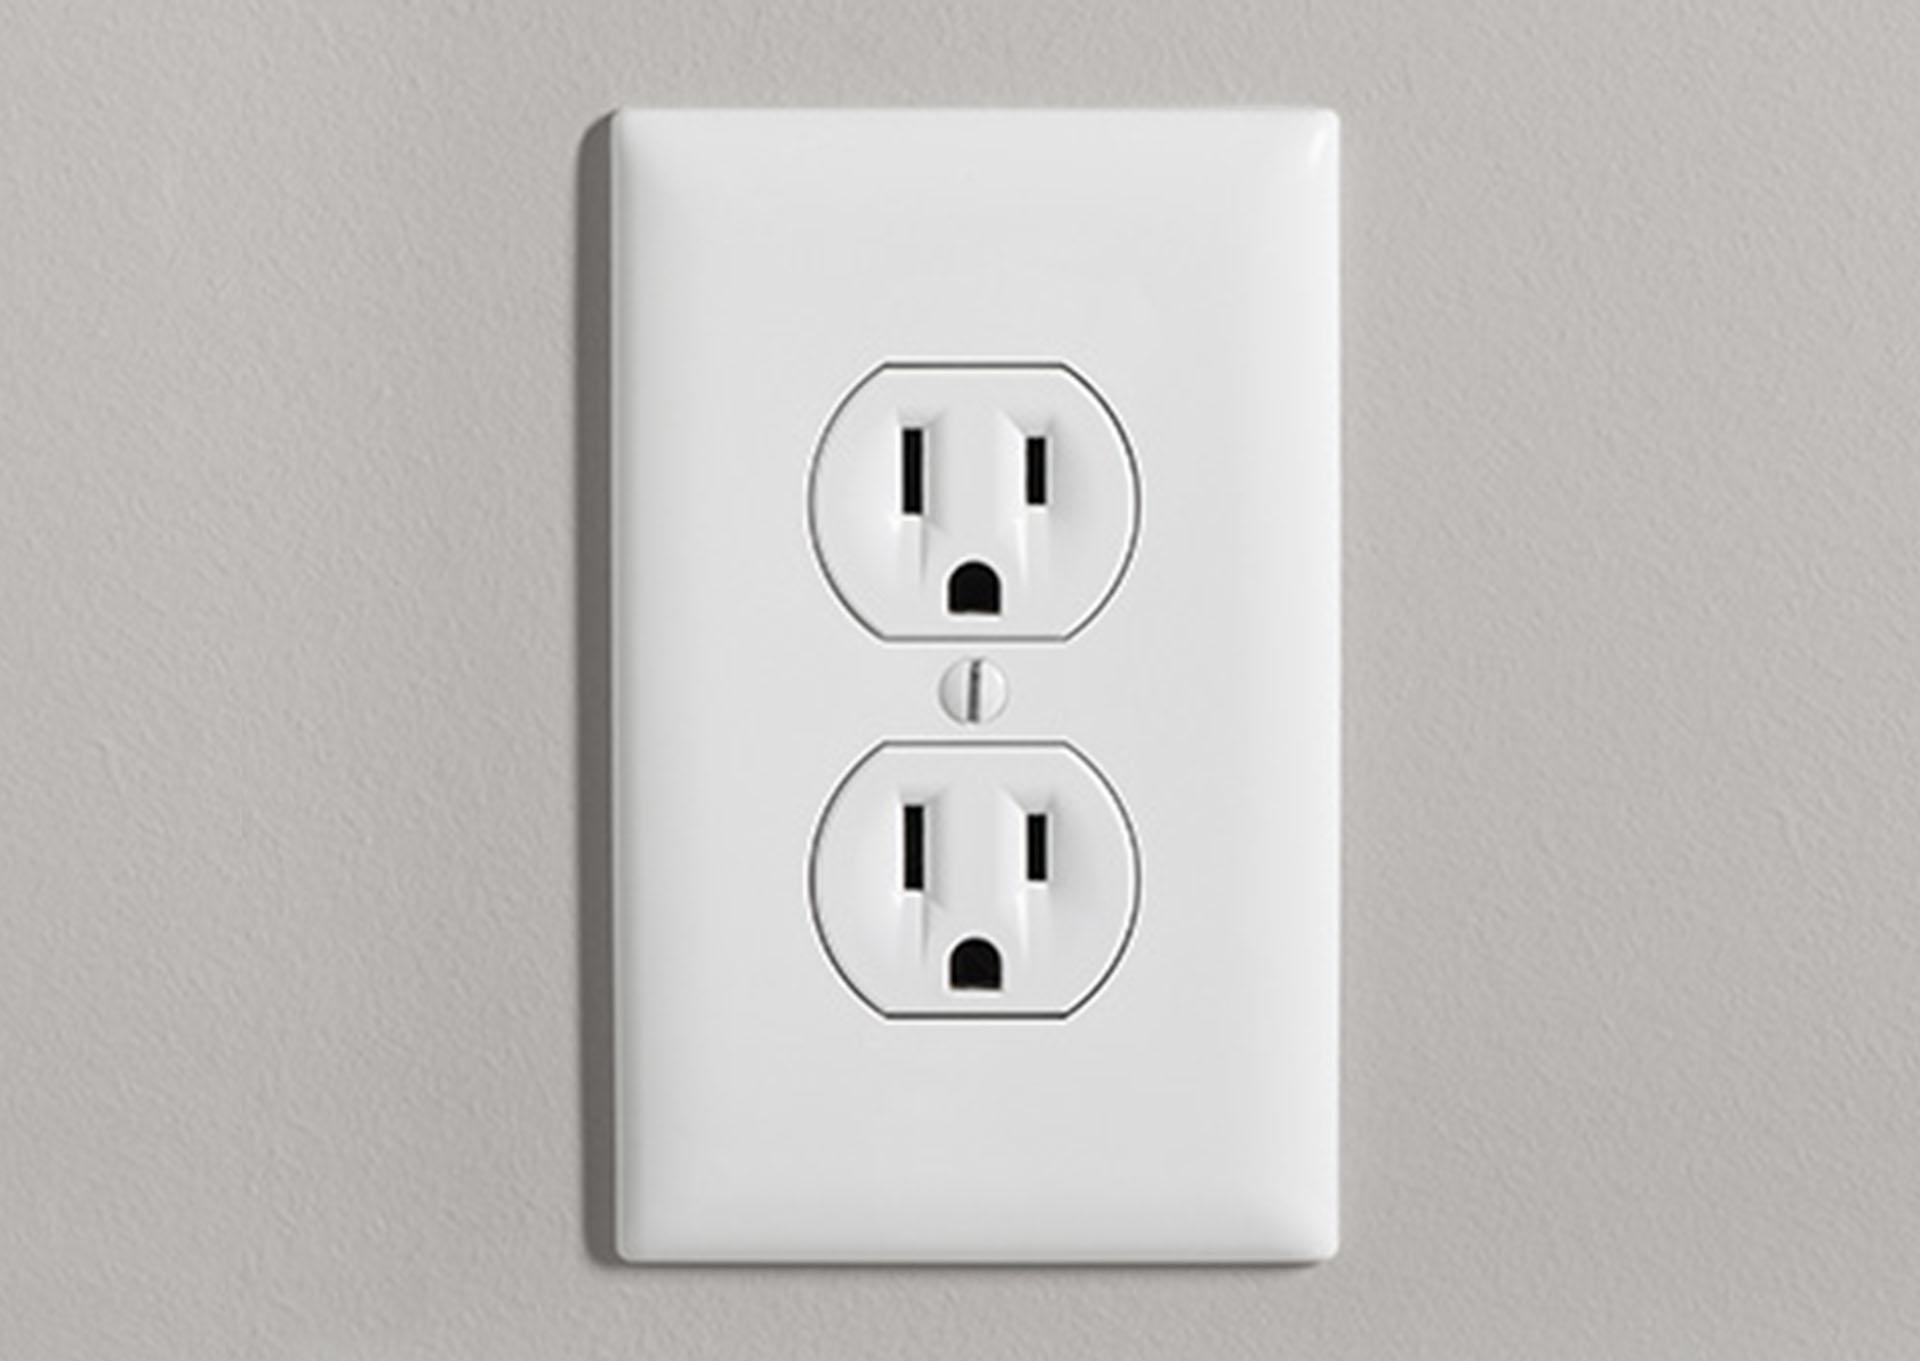 Renaissance Electric Outlet with Cover Plate,Digital Retail Experience